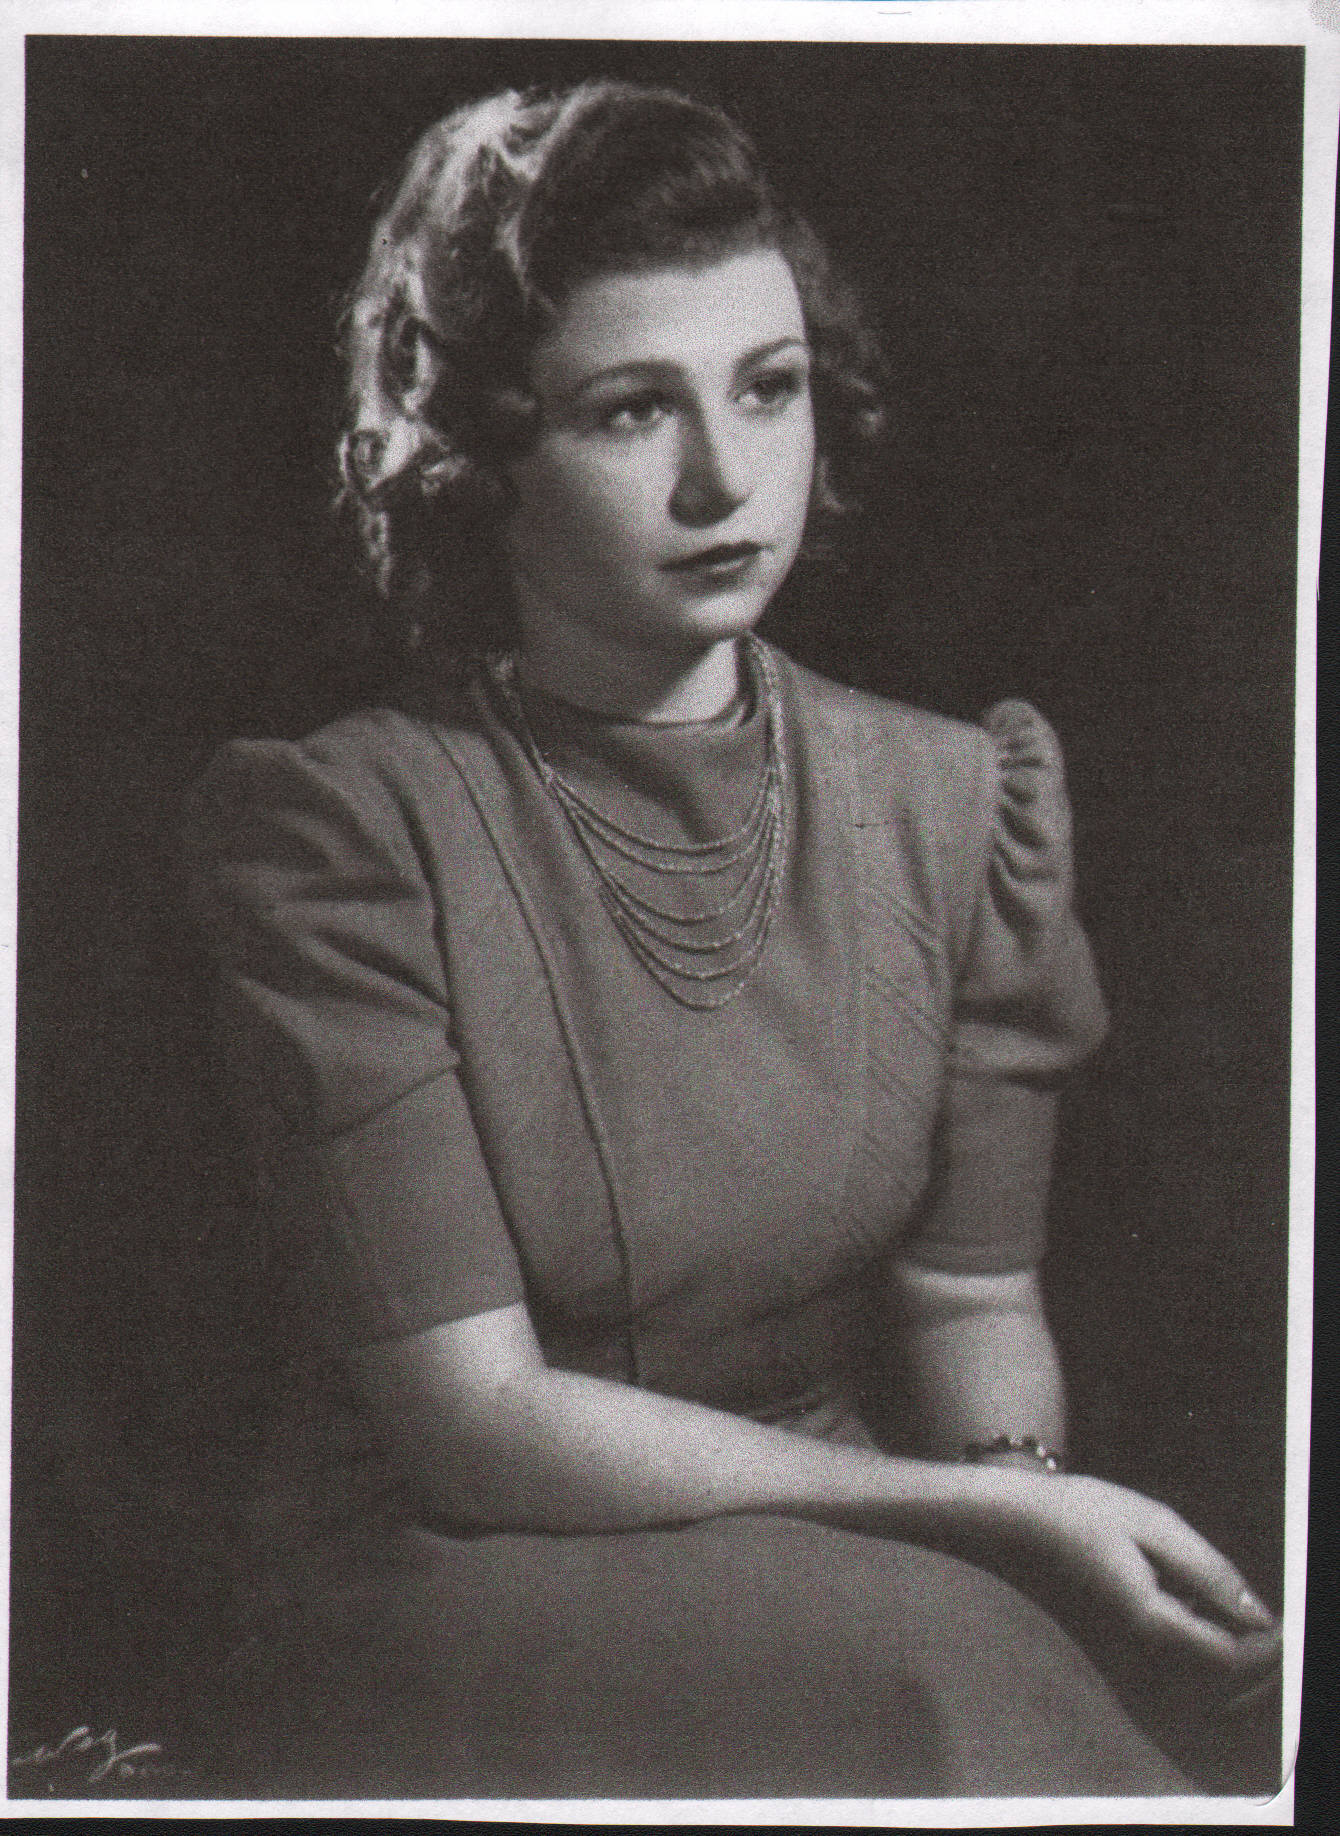 Ruth in late 1940s